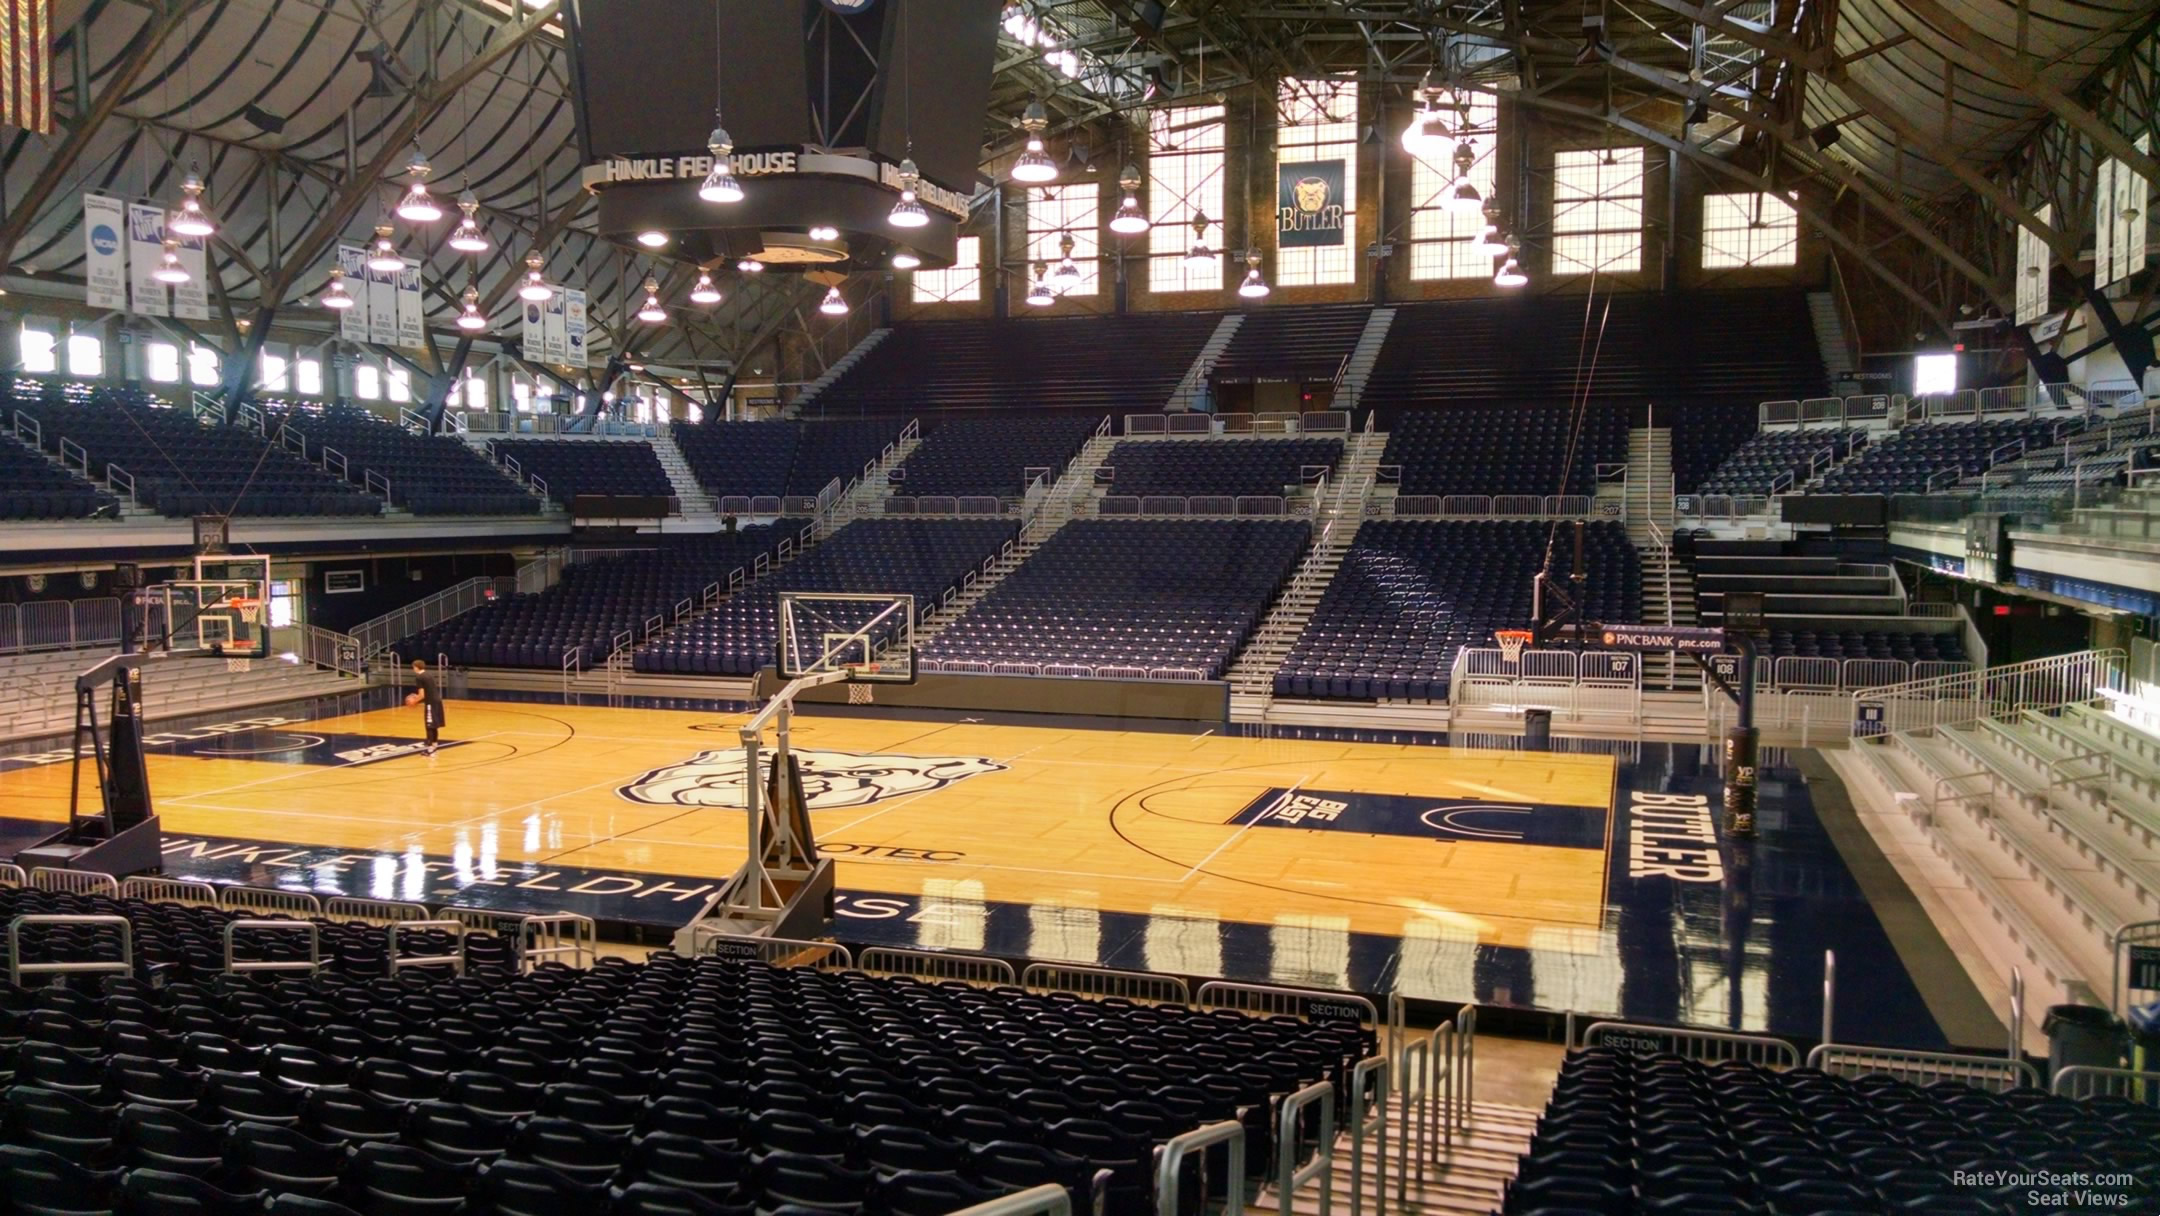 section 116, row 18 seat view  - hinkle fieldhouse